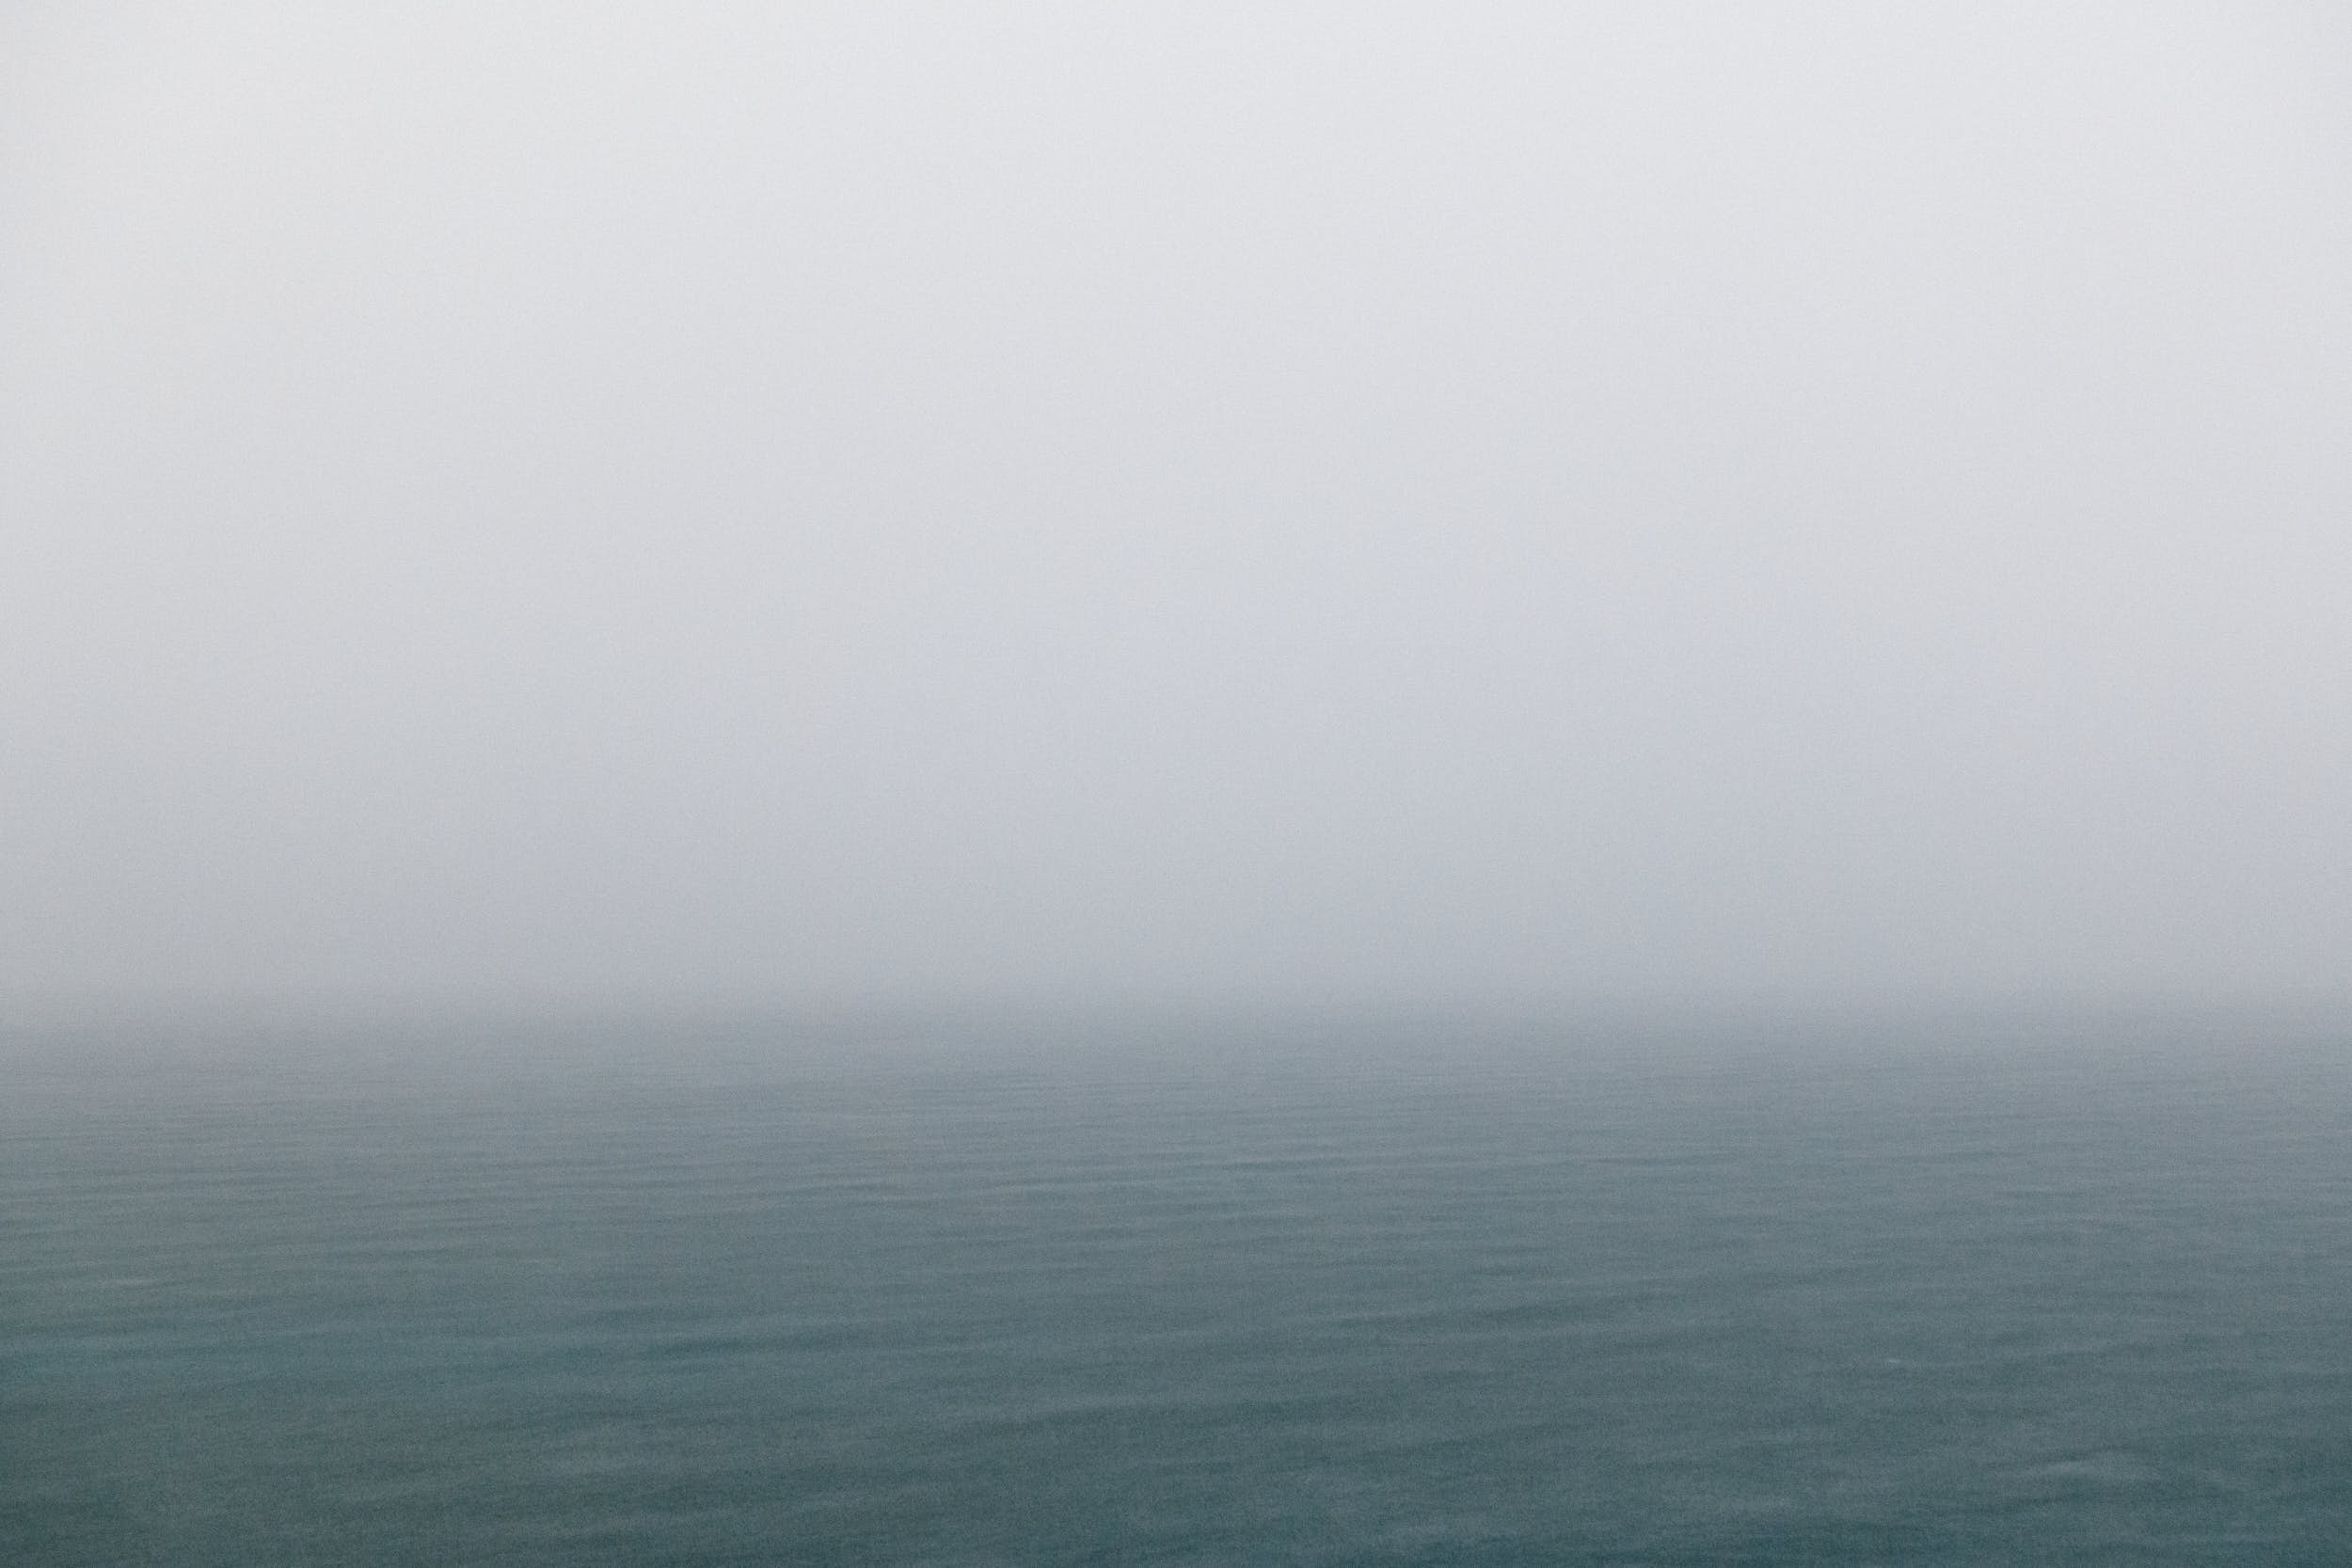 Dramatic minimal seascape during a storm with cool and muted colors.